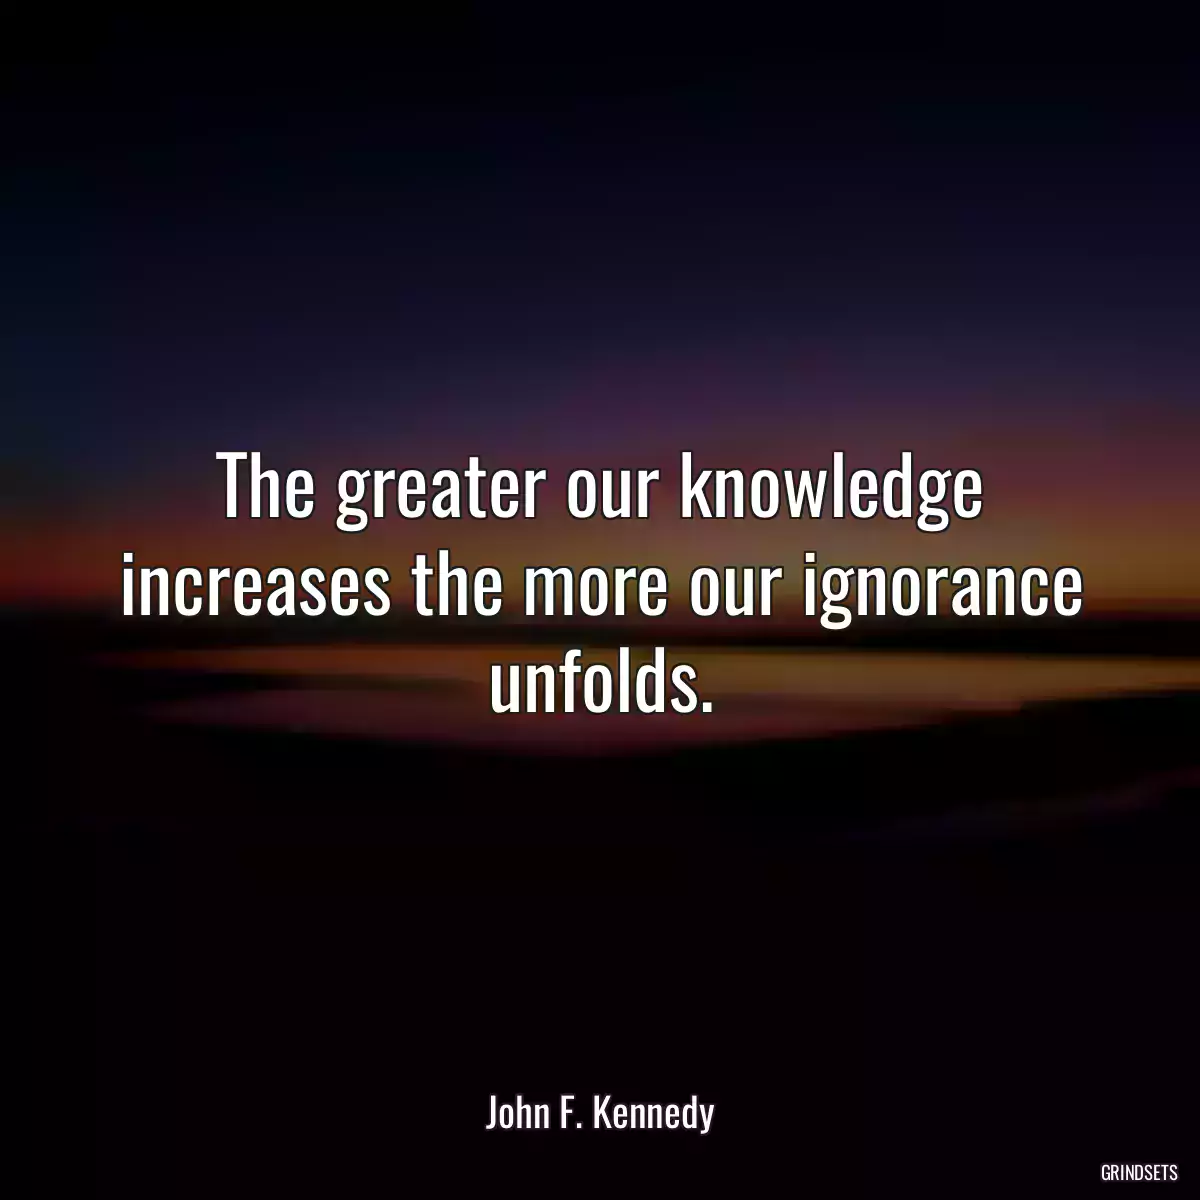 The greater our knowledge increases the more our ignorance unfolds.